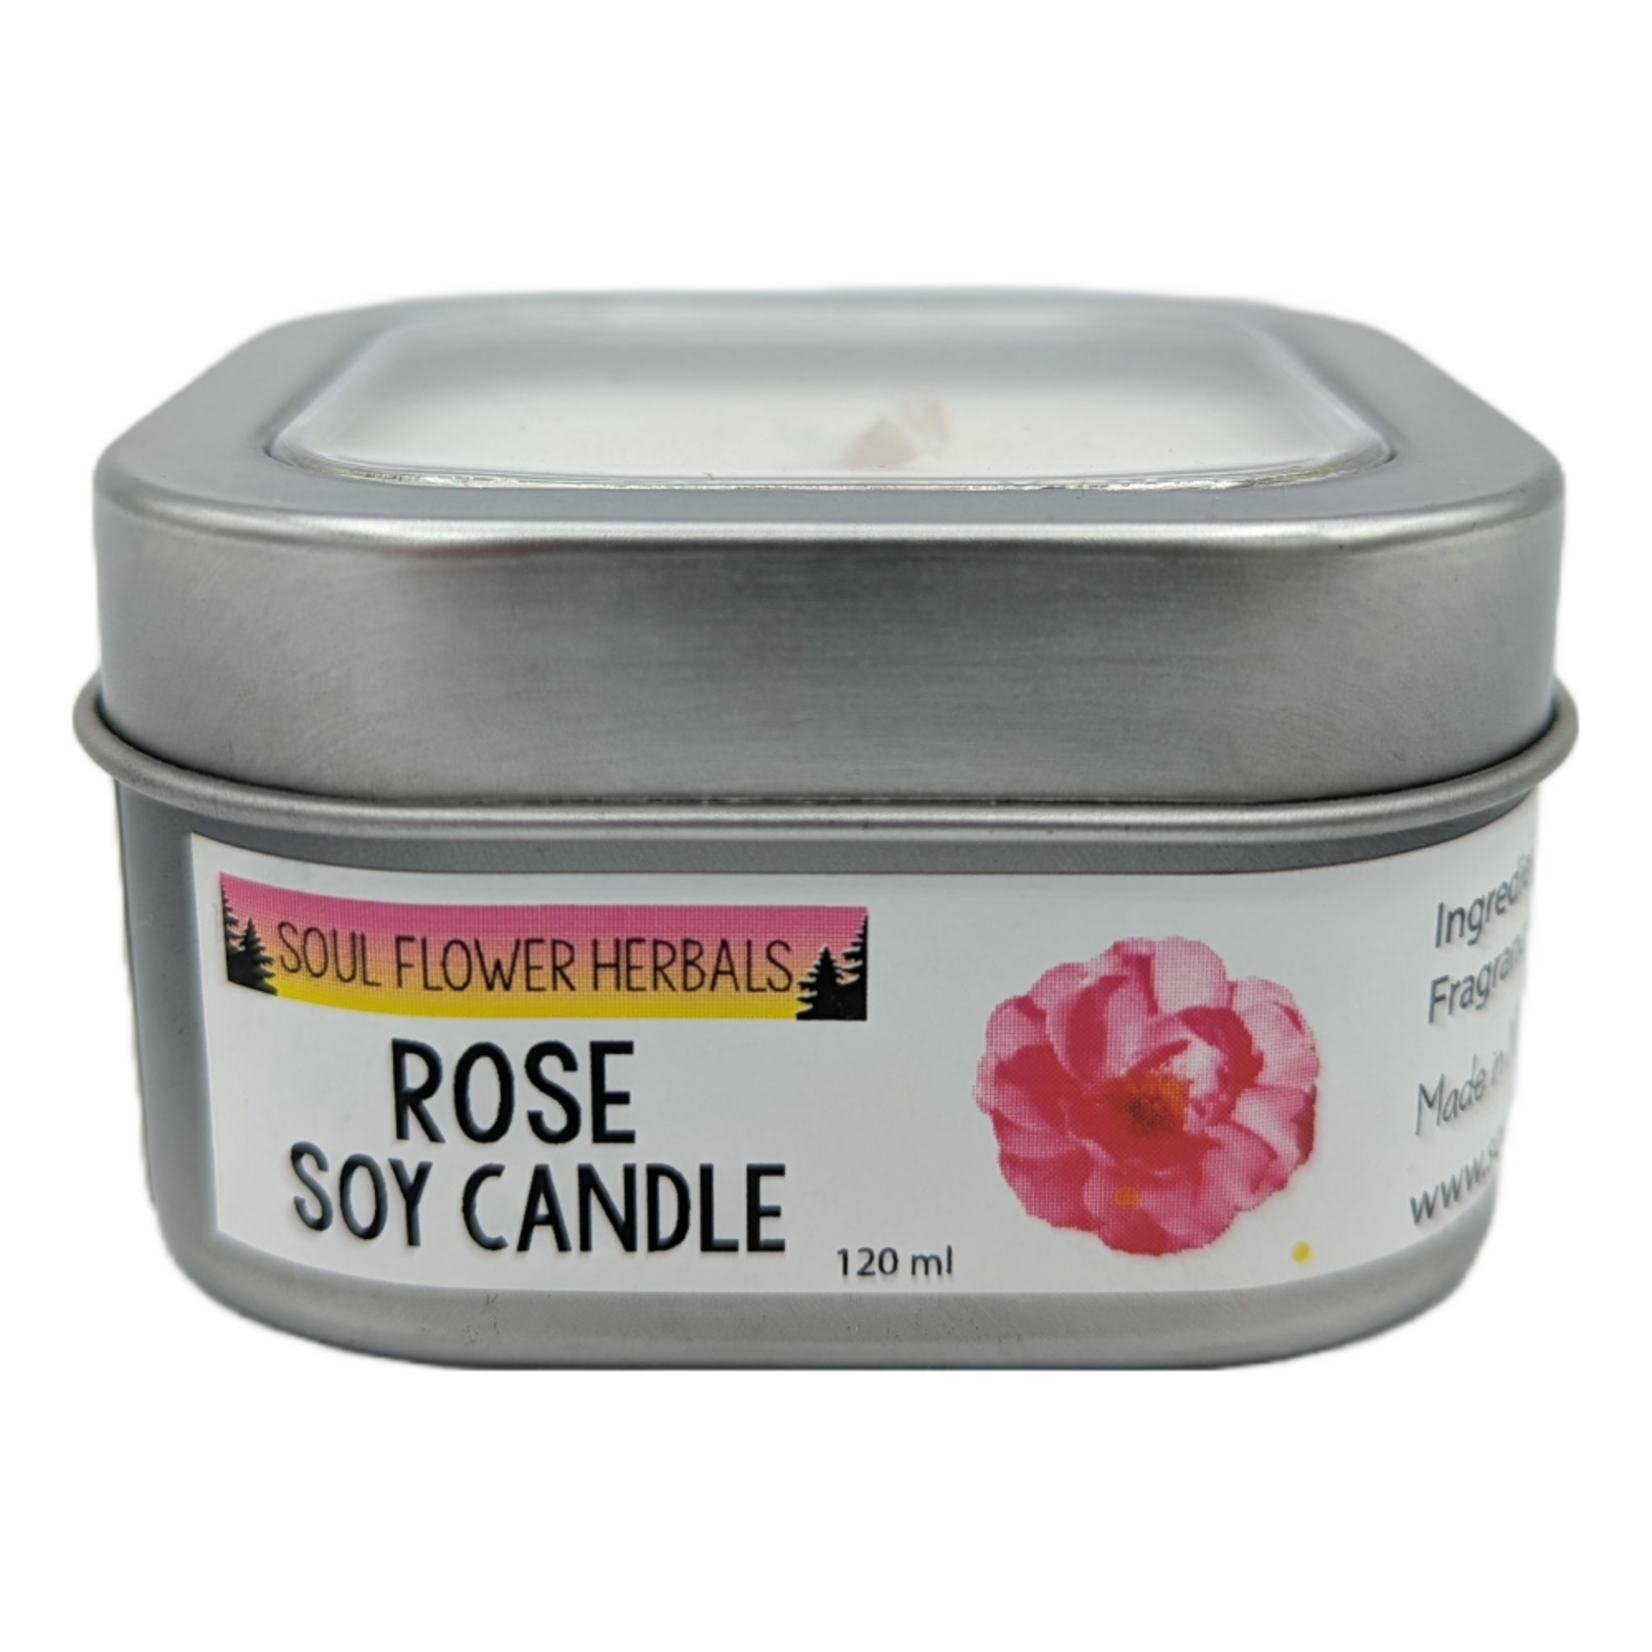 Soul Flower Herbals Soy Candle